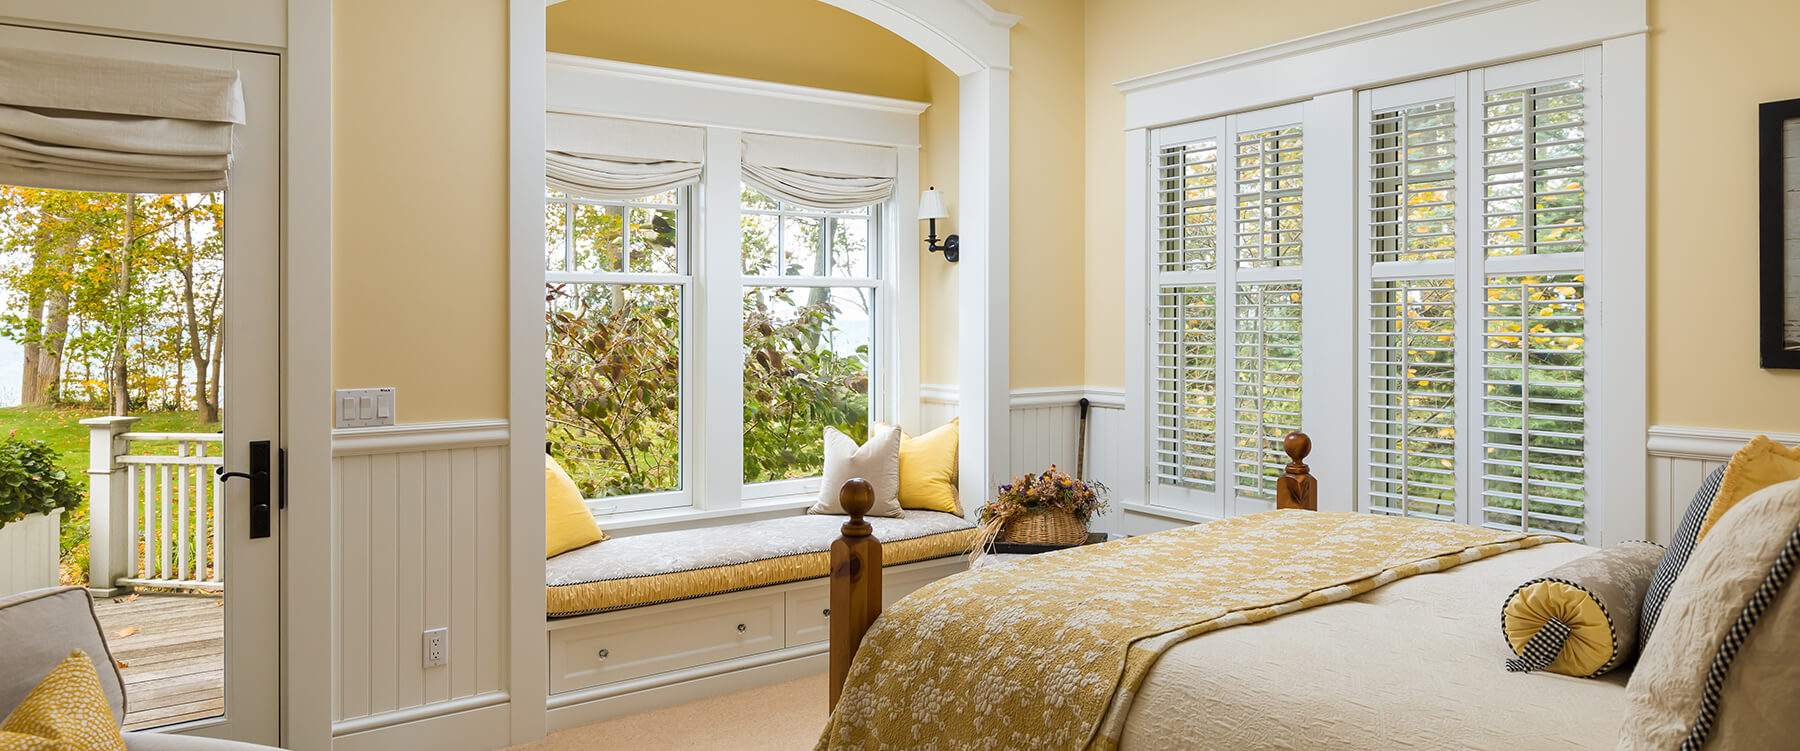 bedroom at shingle style cottage